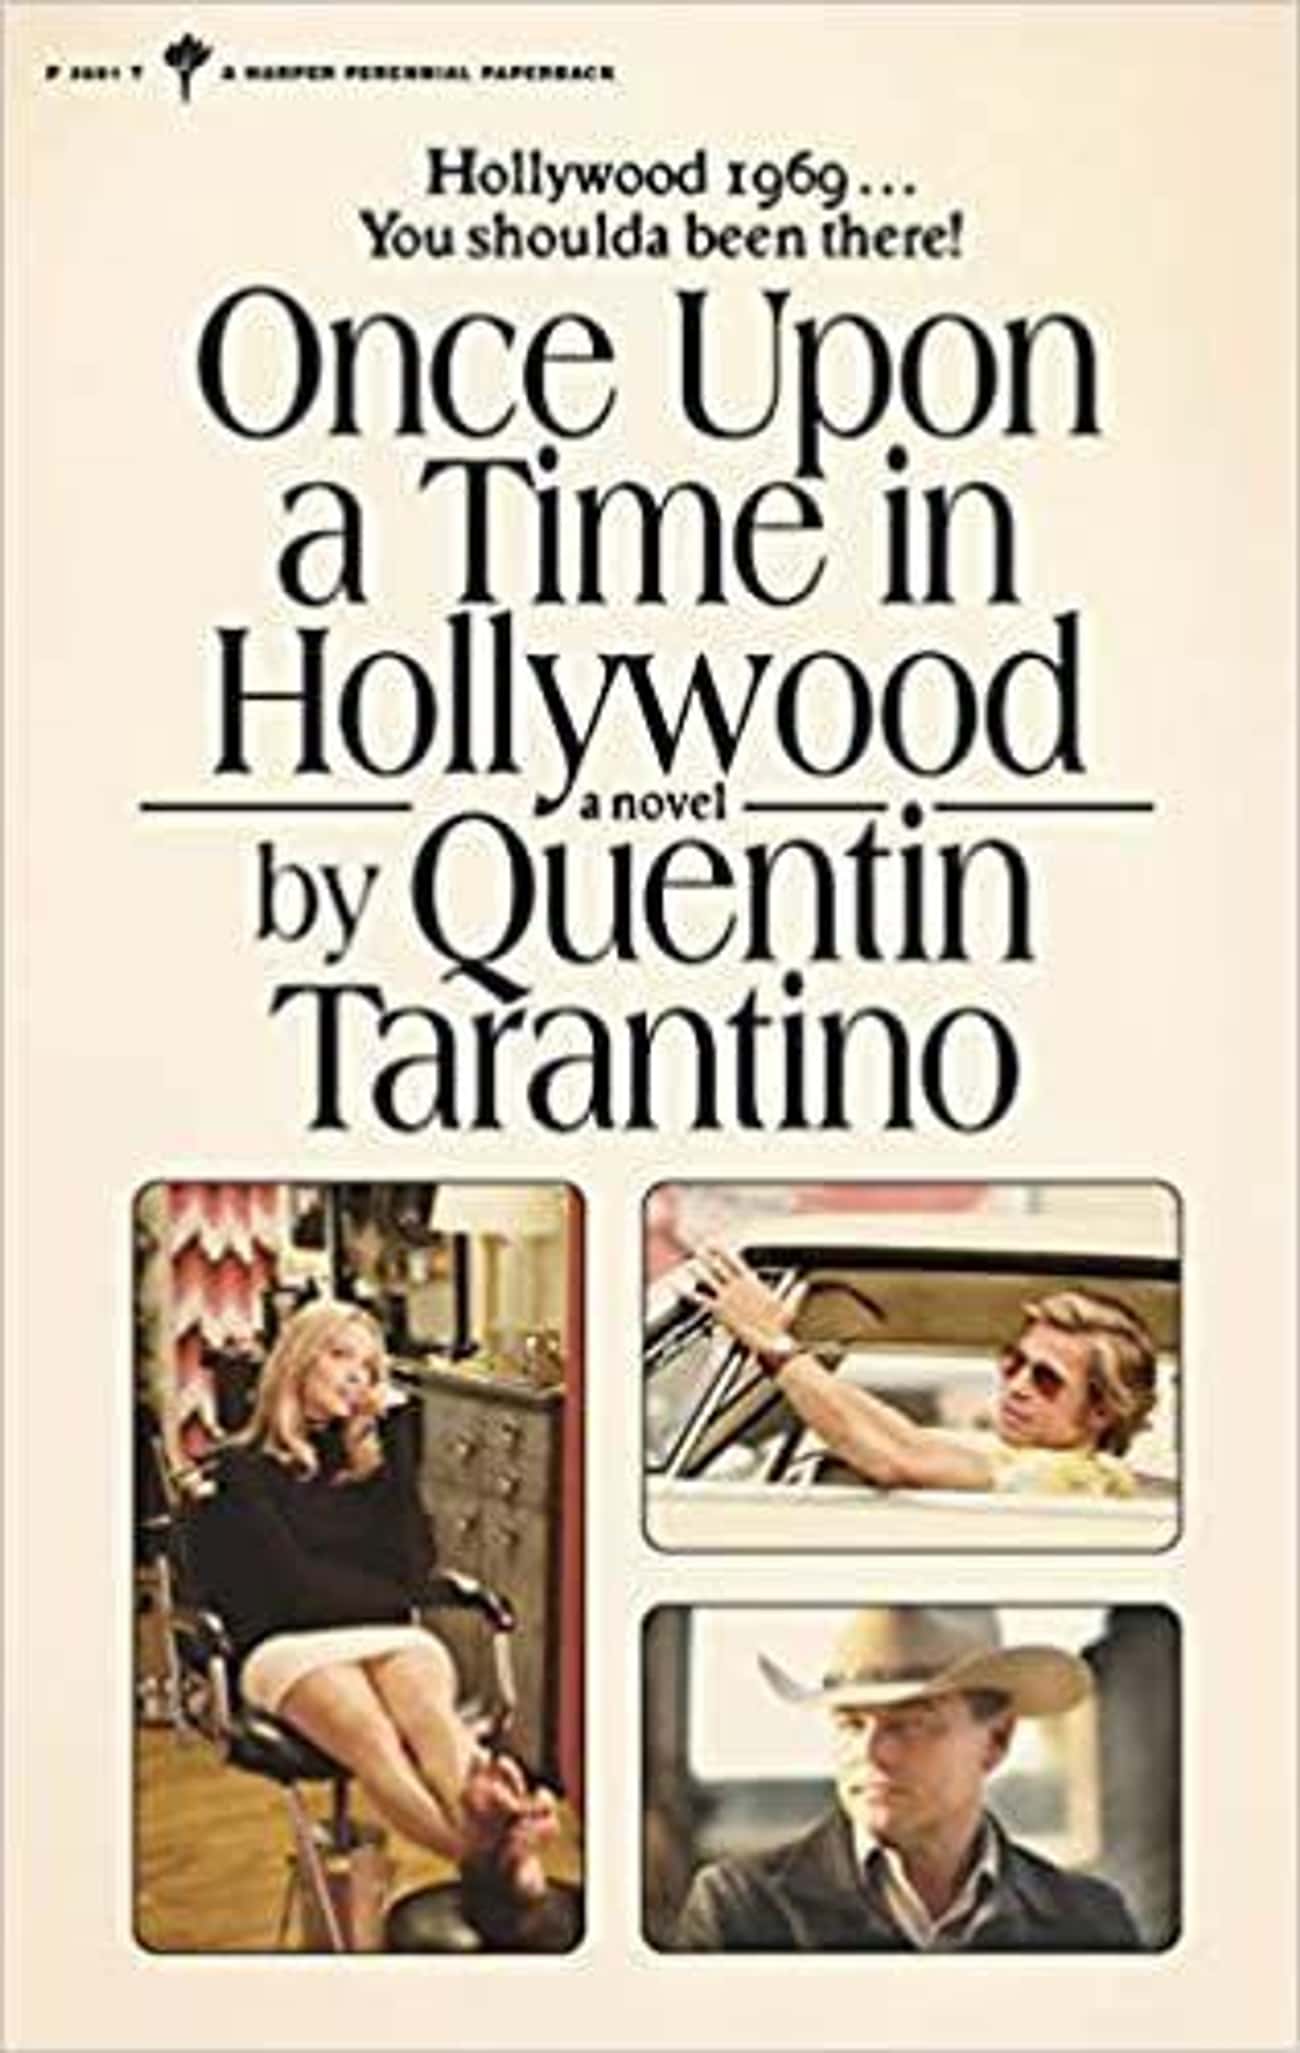 Tarantino Spent Five Years Writing 'Once Upon a Time in Hollywood' As A Novel